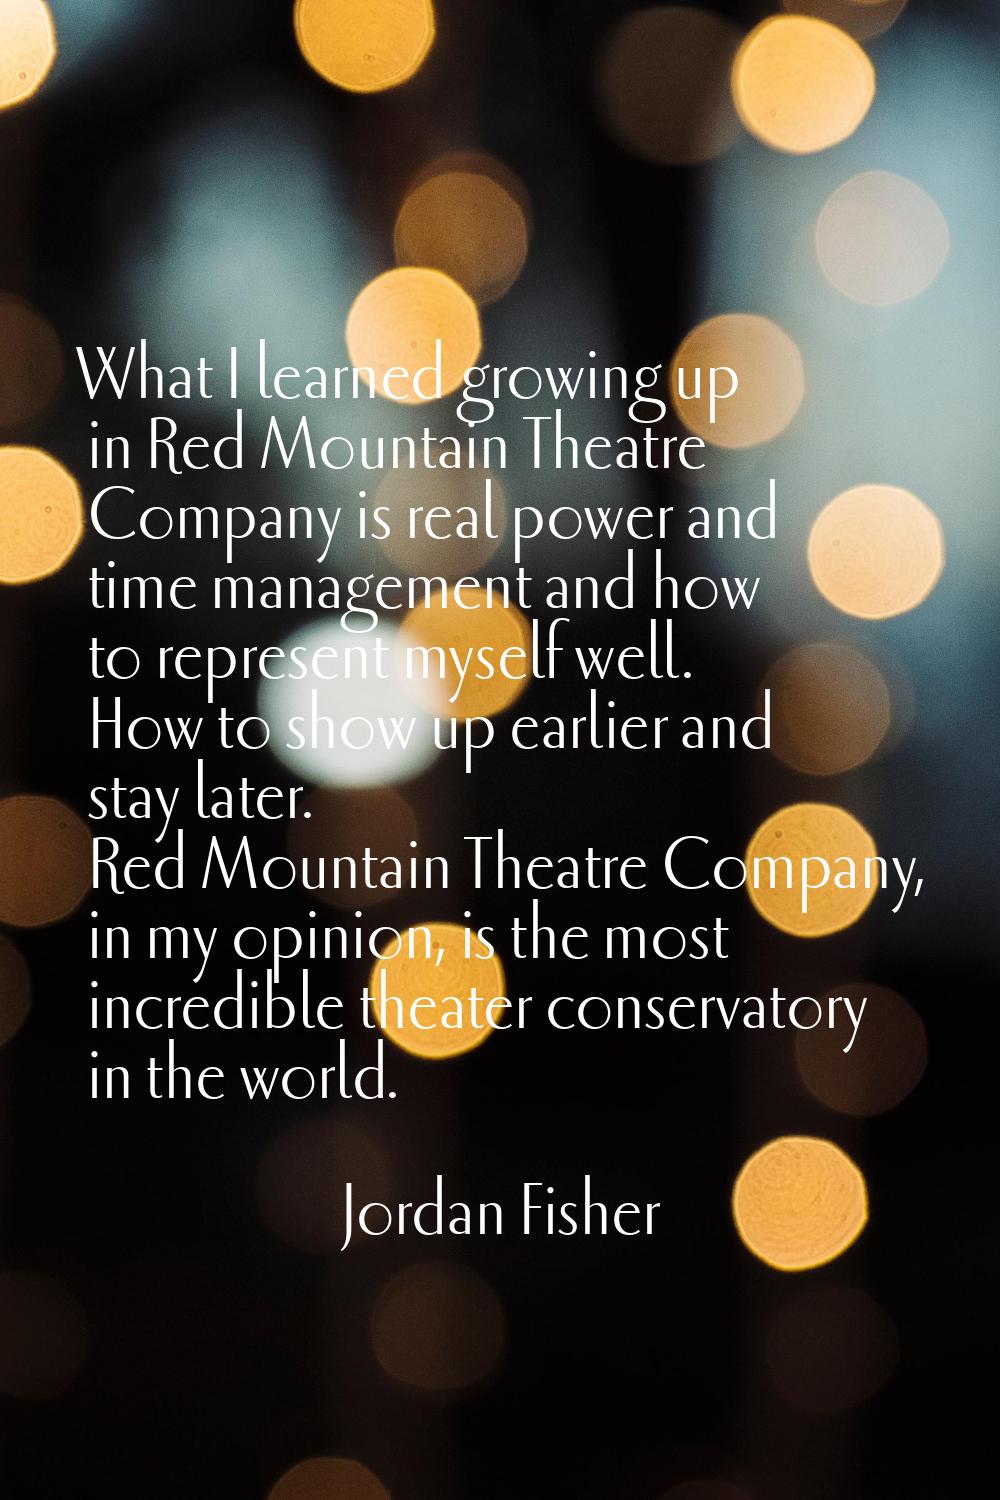 What I learned growing up in Red Mountain Theatre Company is real power and time management and how